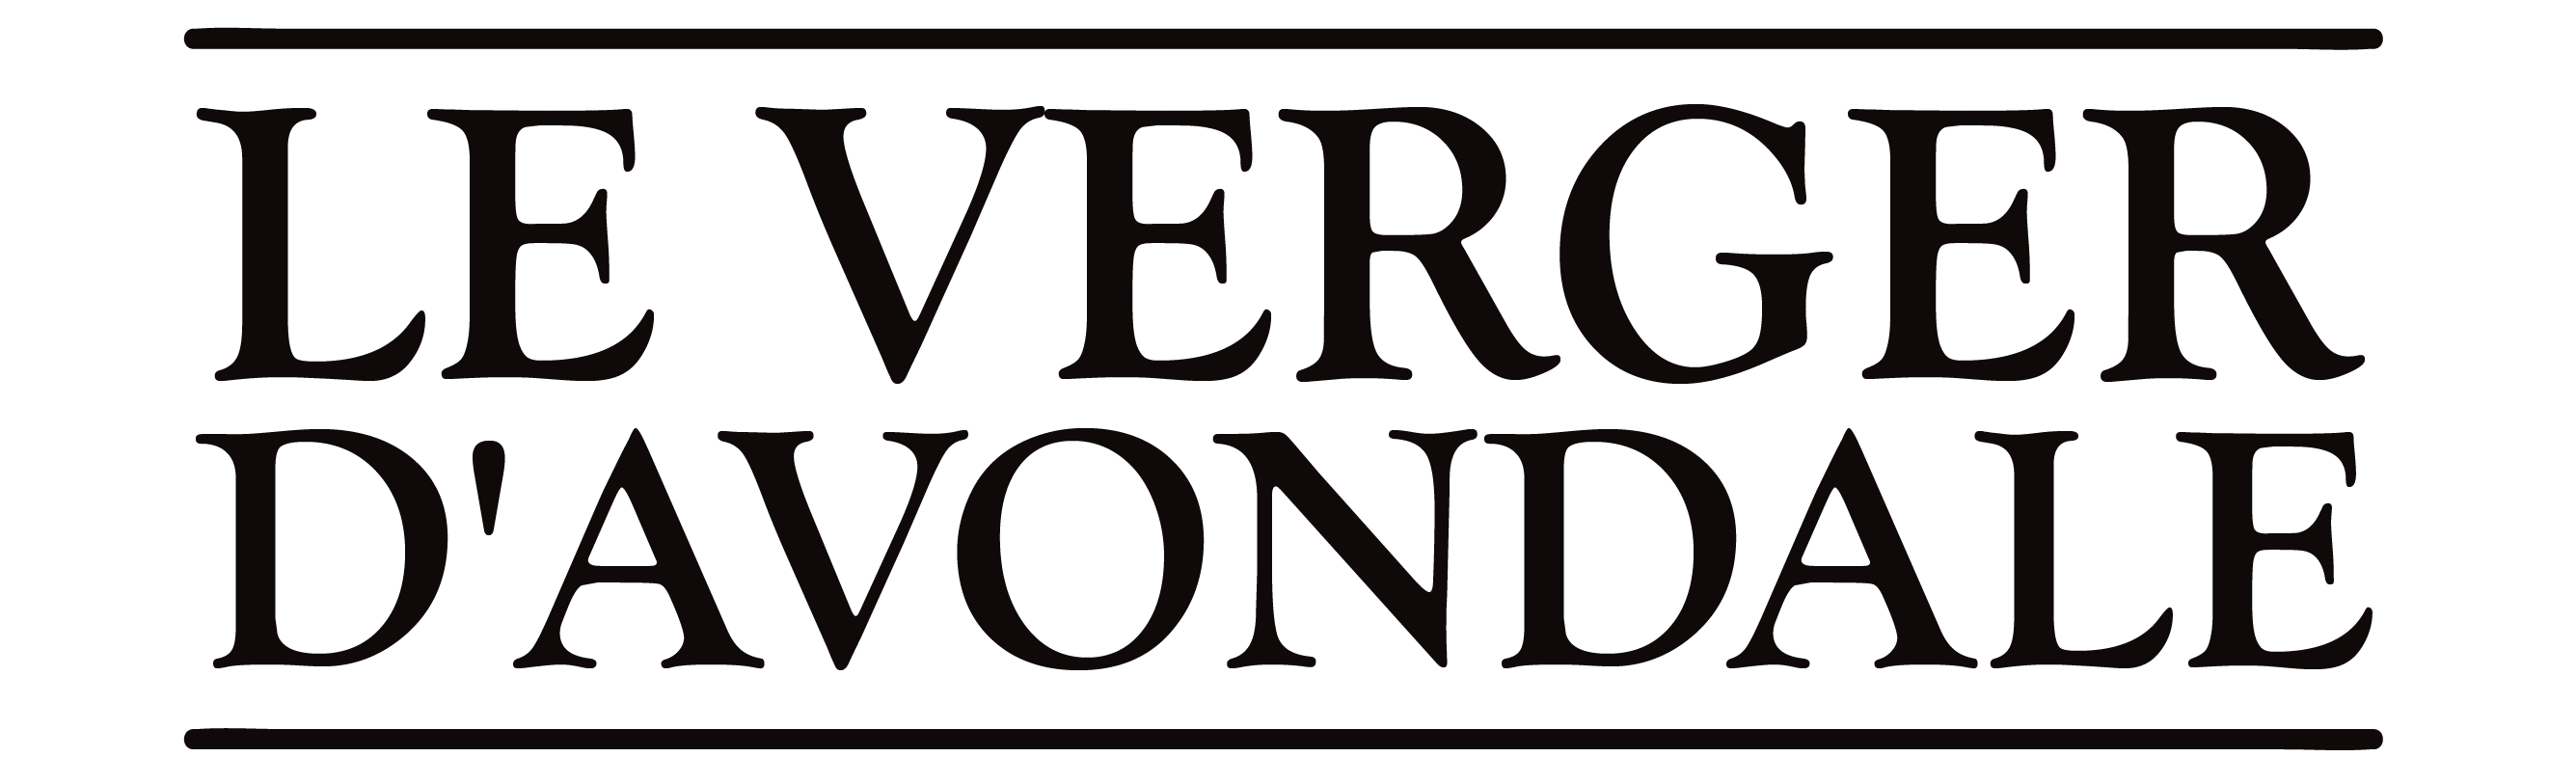 A black and white image of the words " vergewonder ".